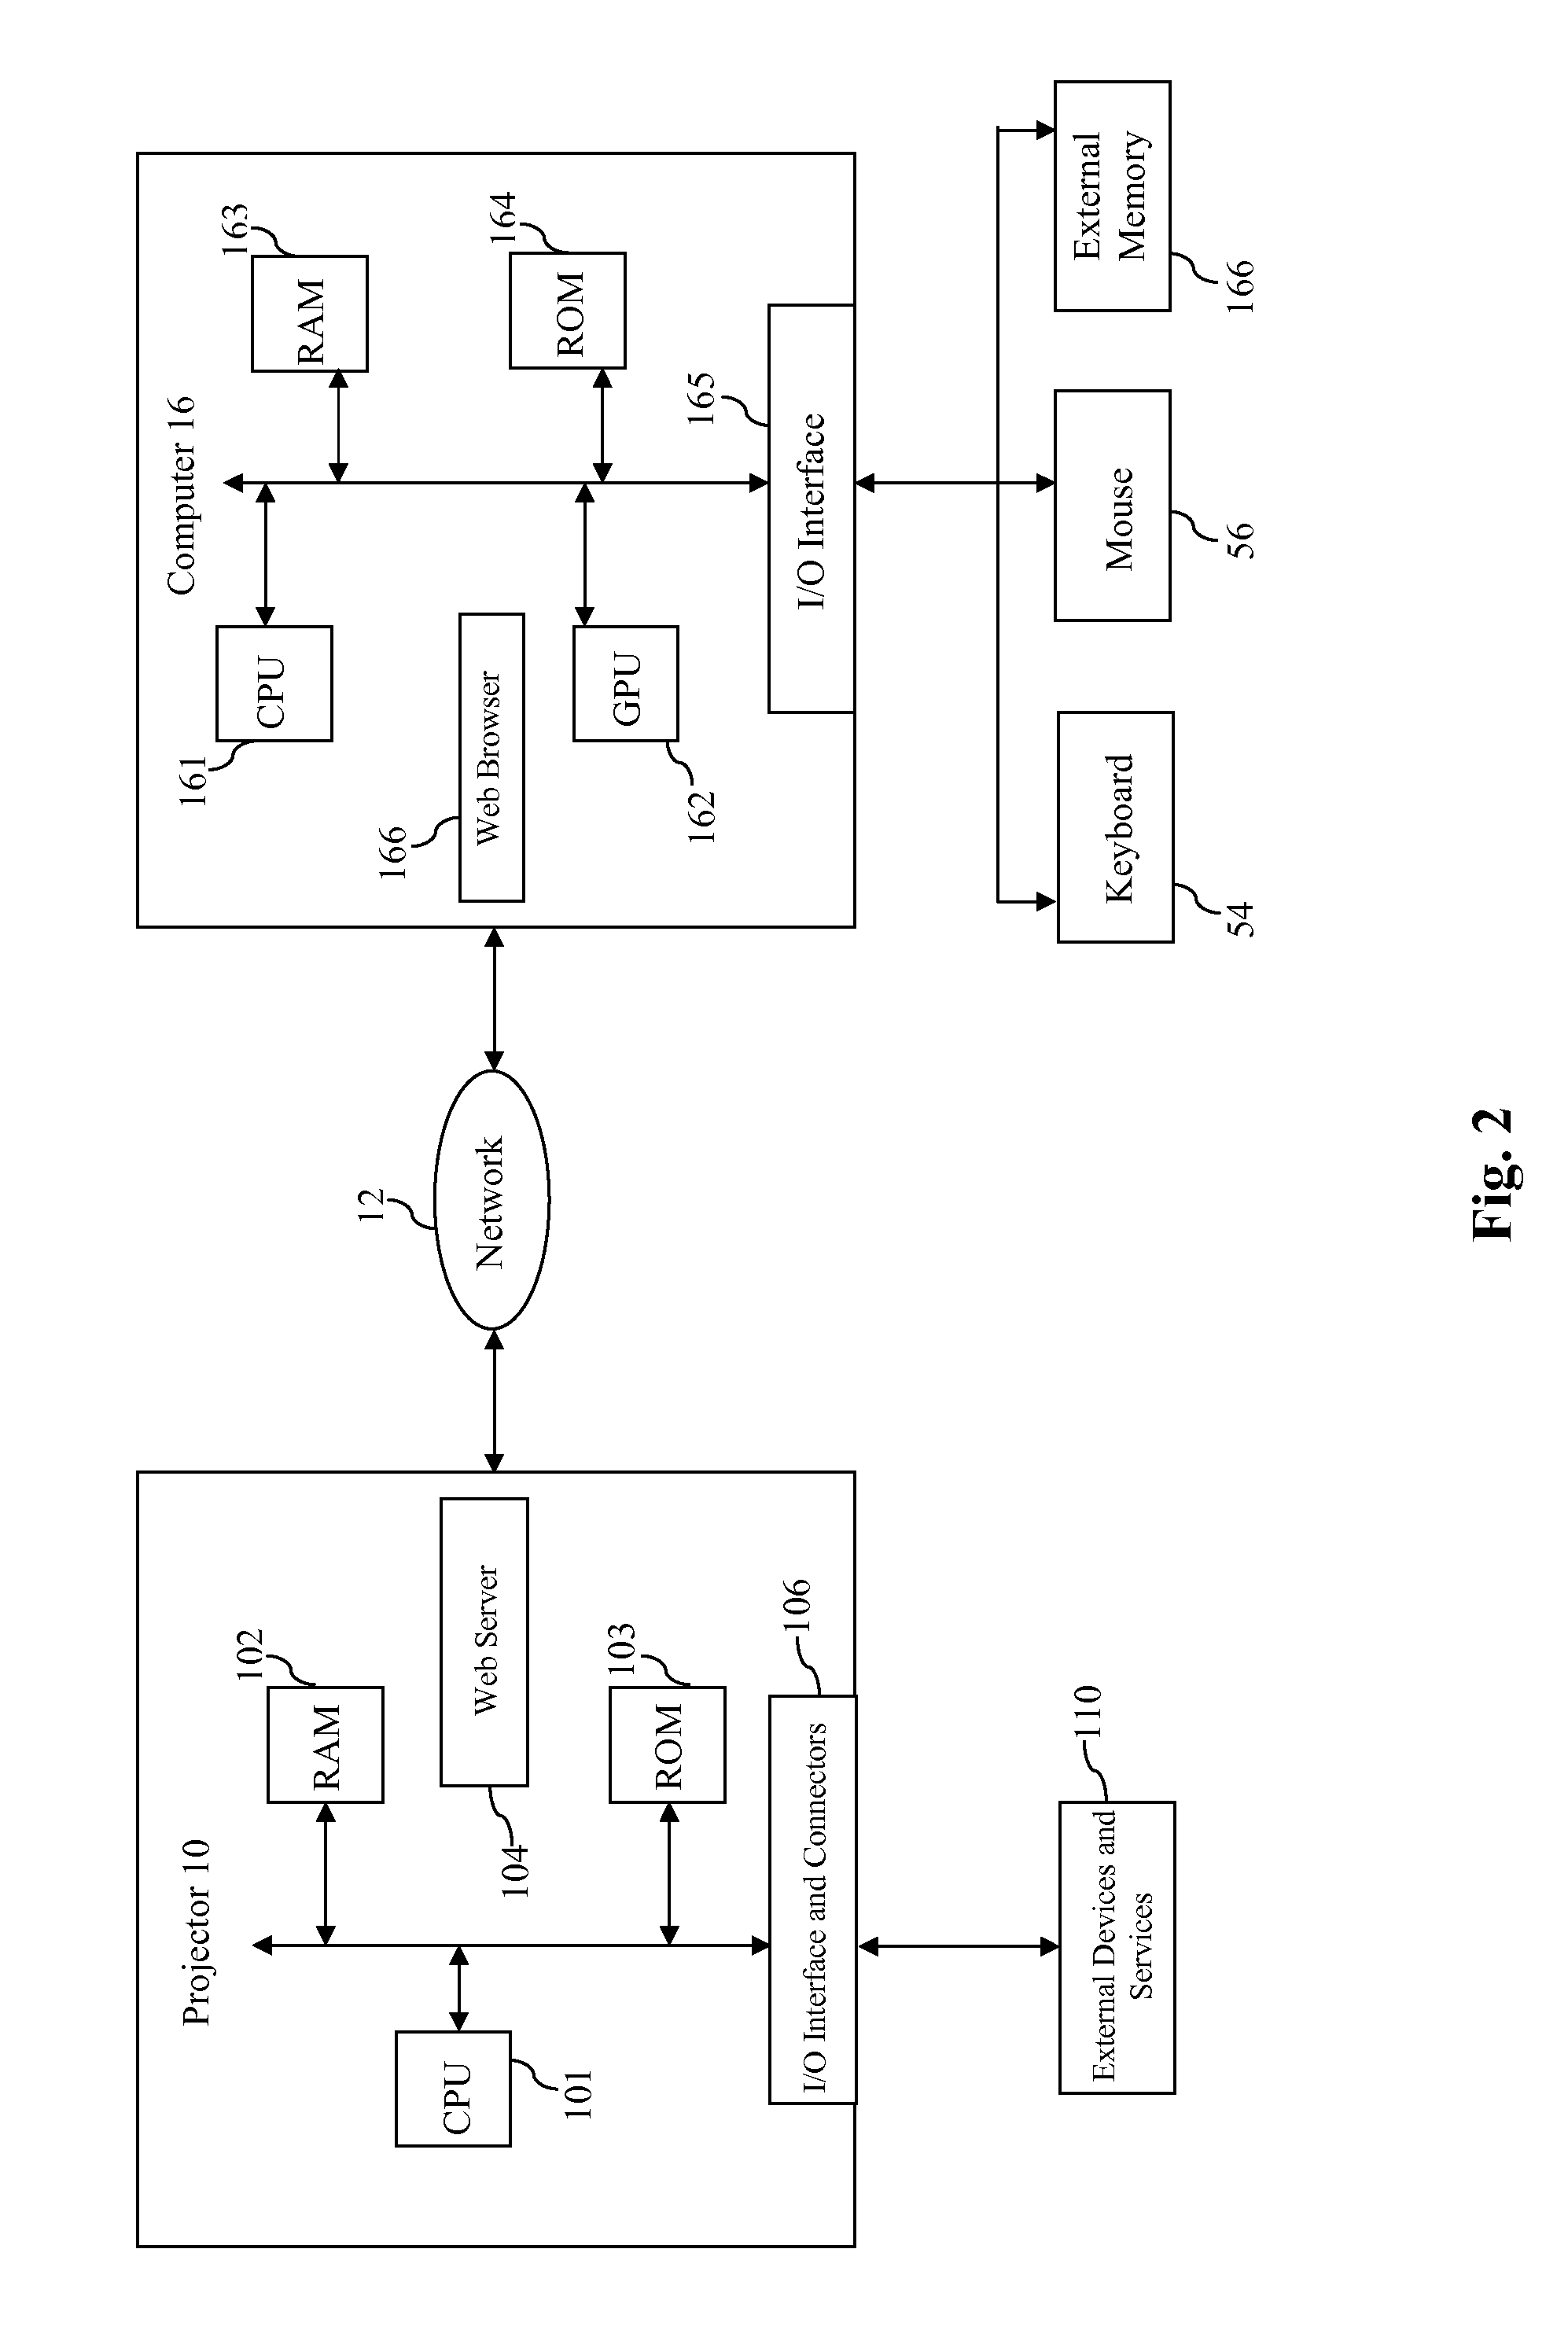 Method for Securely Distributing Meeting Data from Interactive Whiteboard Projector